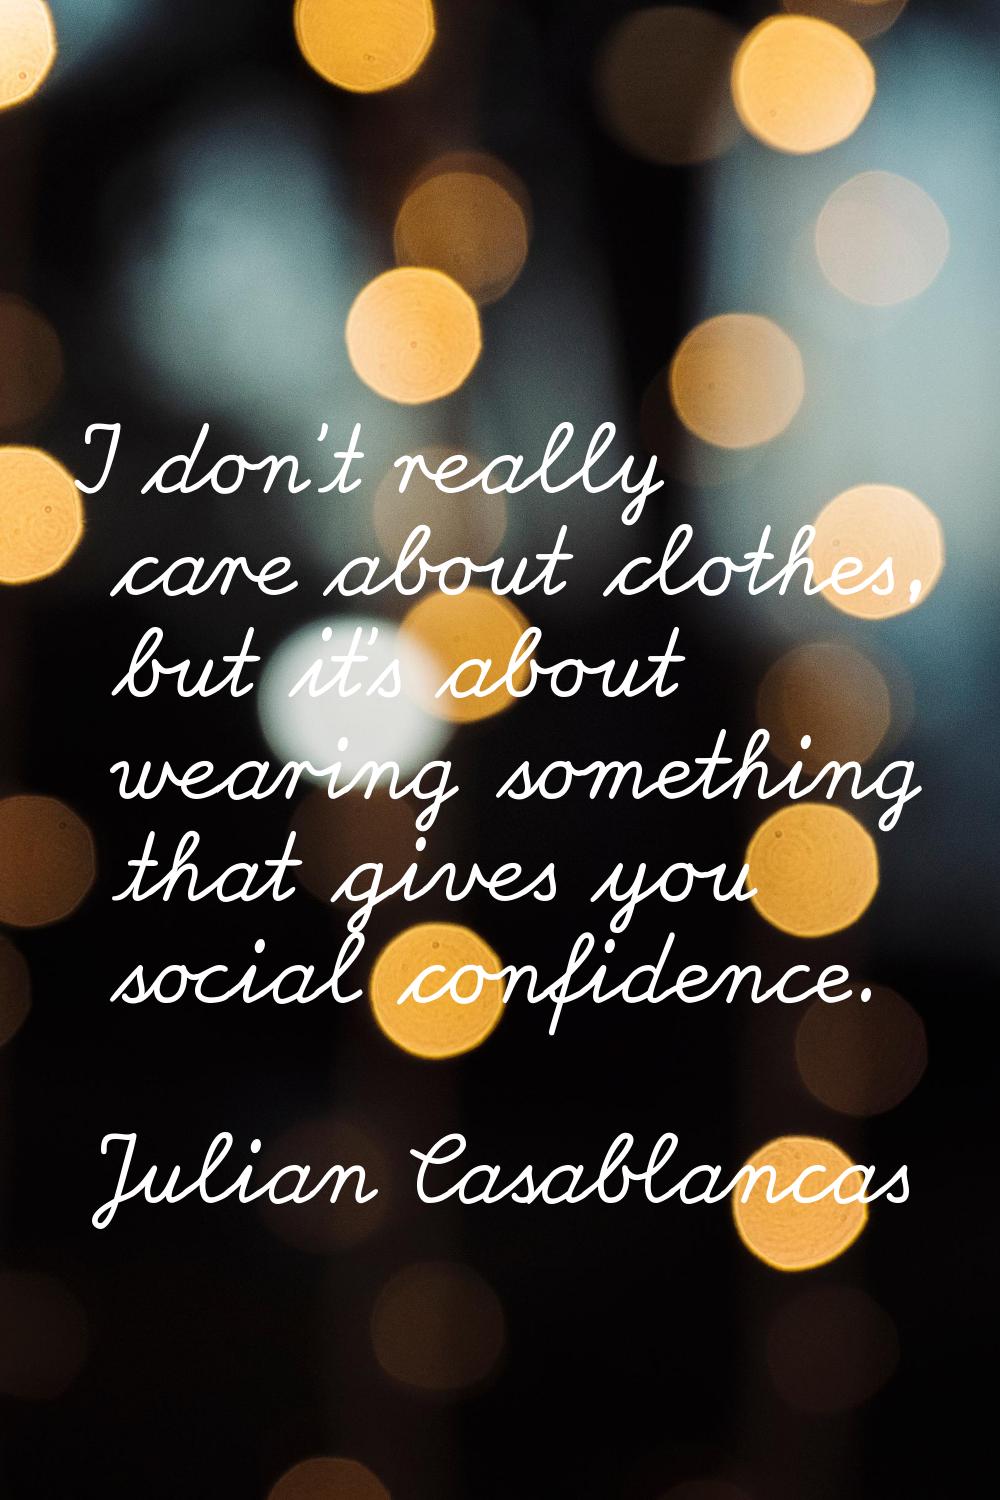 I don't really care about clothes, but it's about wearing something that gives you social confidenc